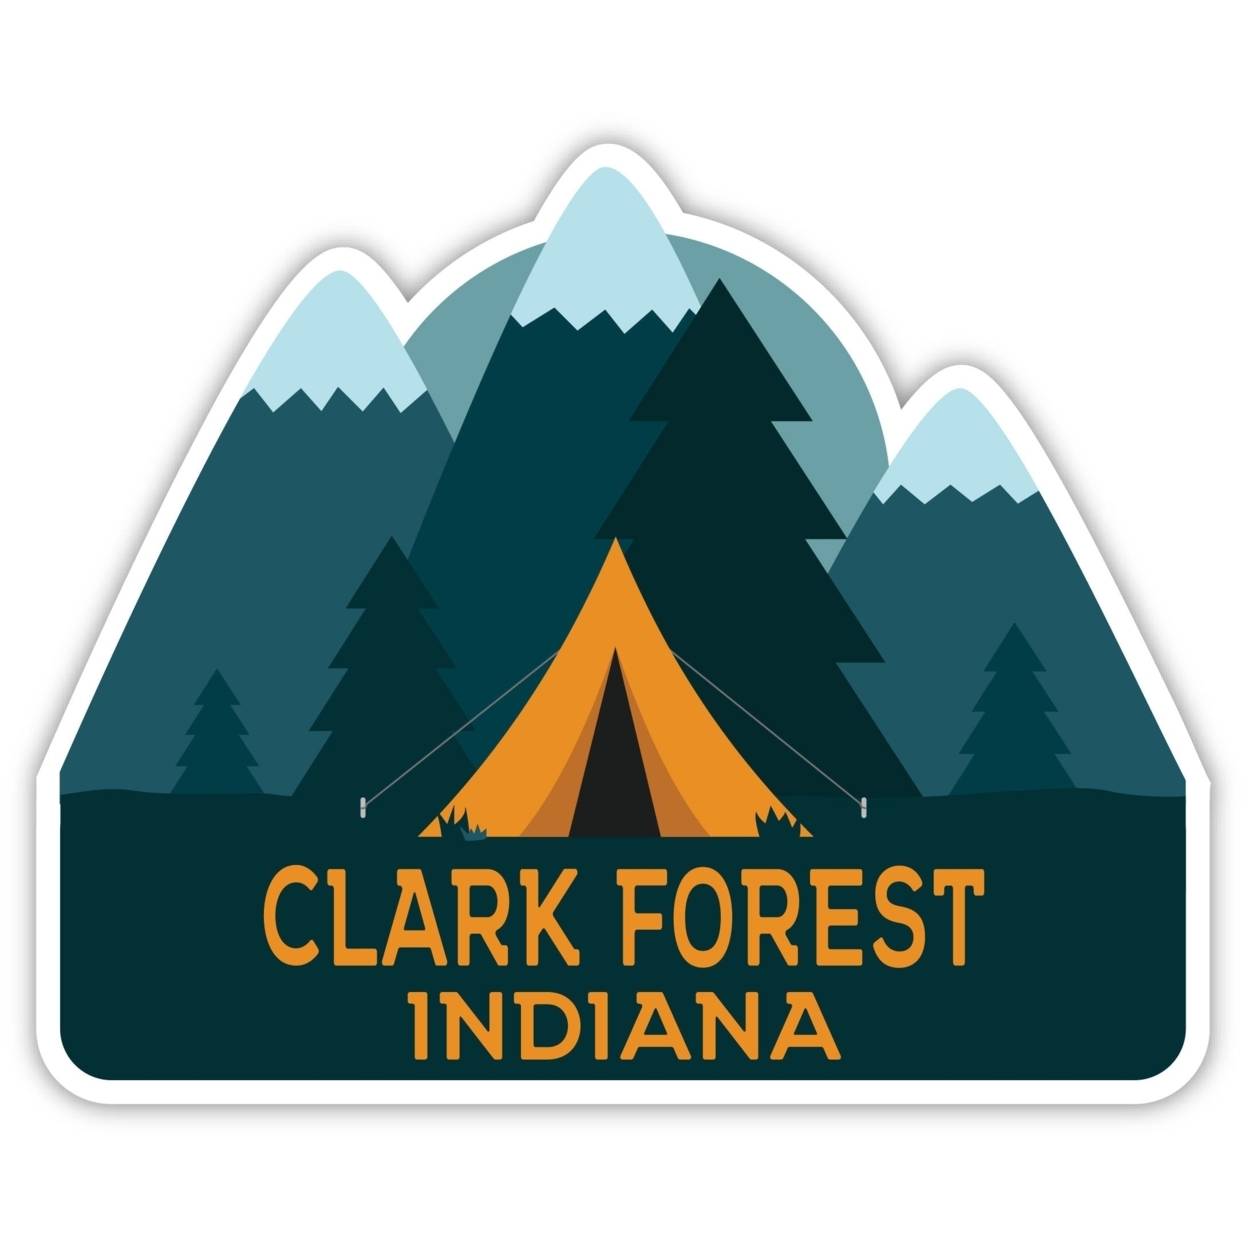 Clark Forest Indiana Souvenir Decorative Stickers (Choose Theme And Size) - Single Unit, 6-Inch, Tent